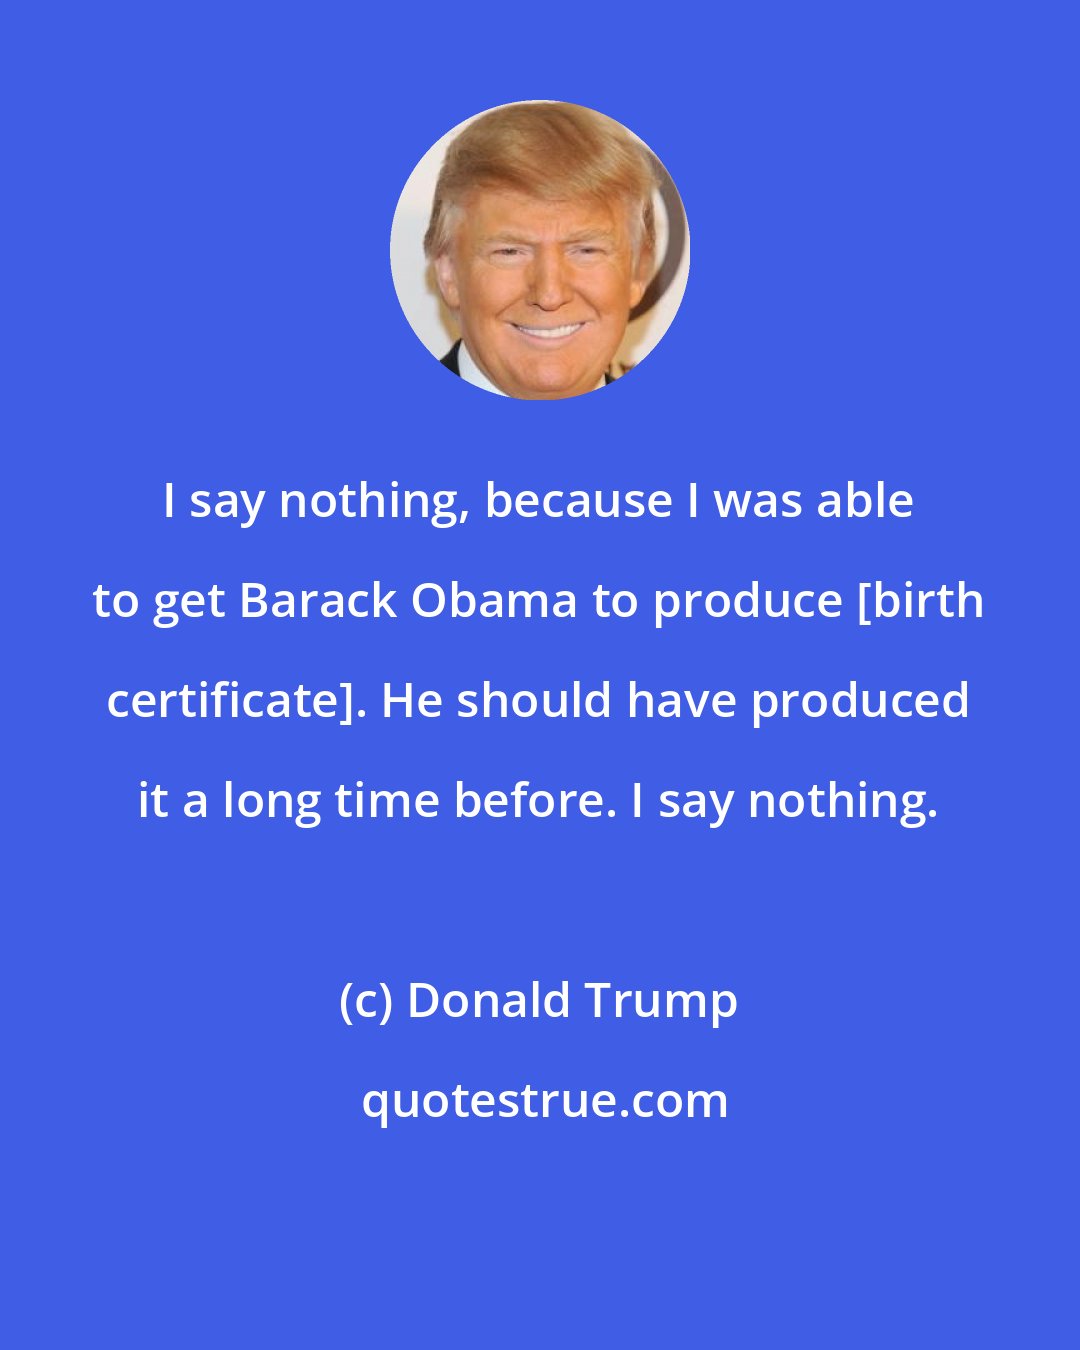 Donald Trump: I say nothing, because I was able to get Barack Obama to produce [birth certificate]. He should have produced it a long time before. I say nothing.